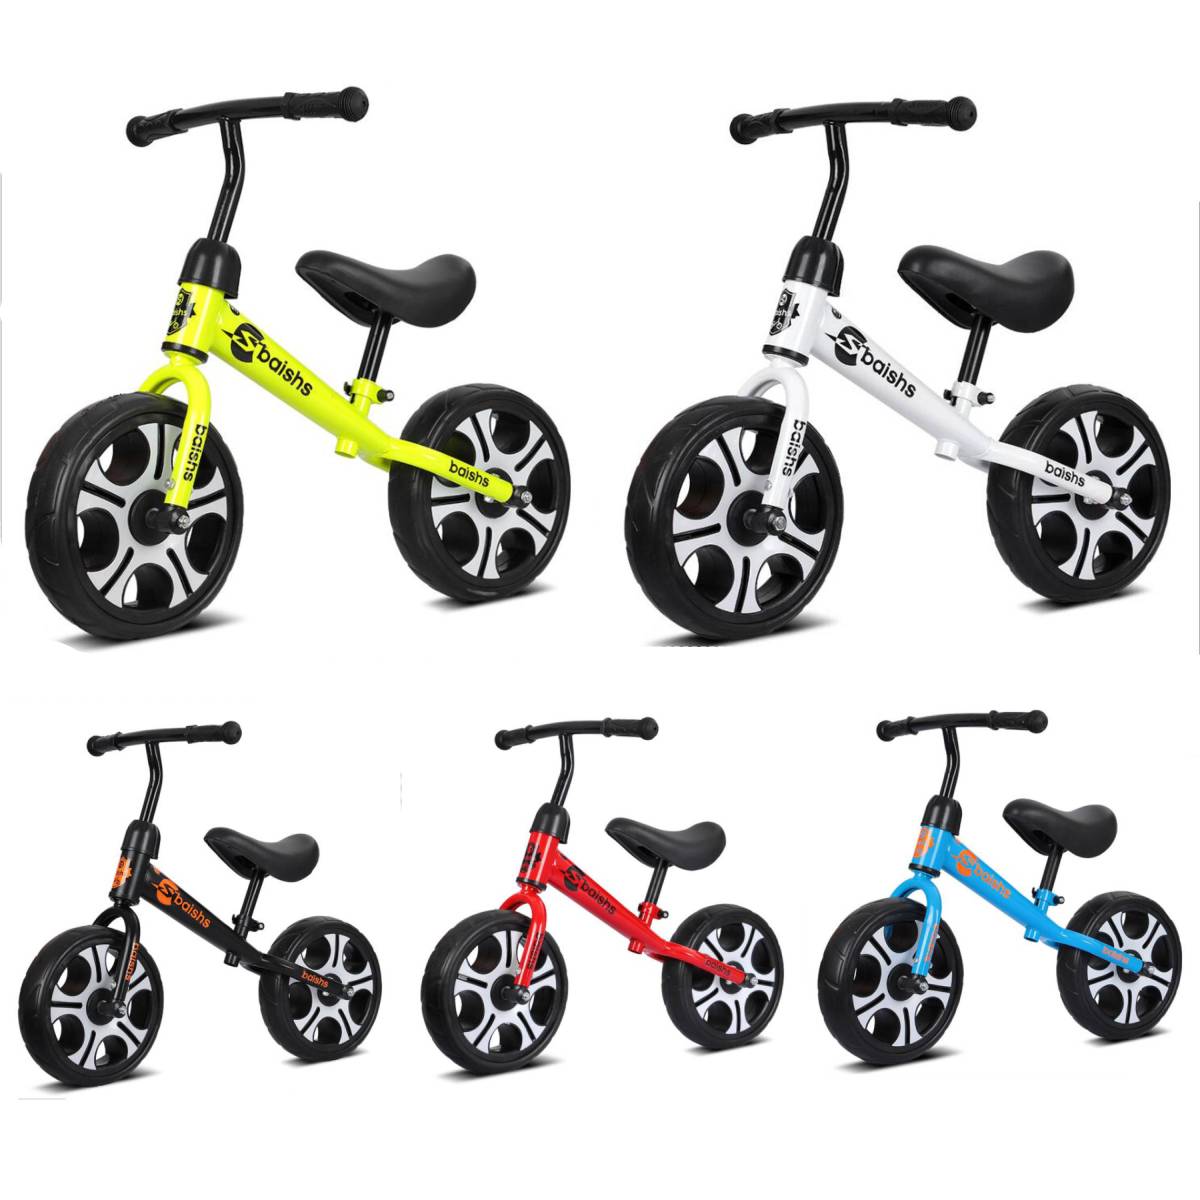 12Inch No Pedal Free Toddle Balance Bike Baby Sliding Bike Kids Bike Metal Scooter Baby Walker Ride on Toys for 2-6 Years Old Games